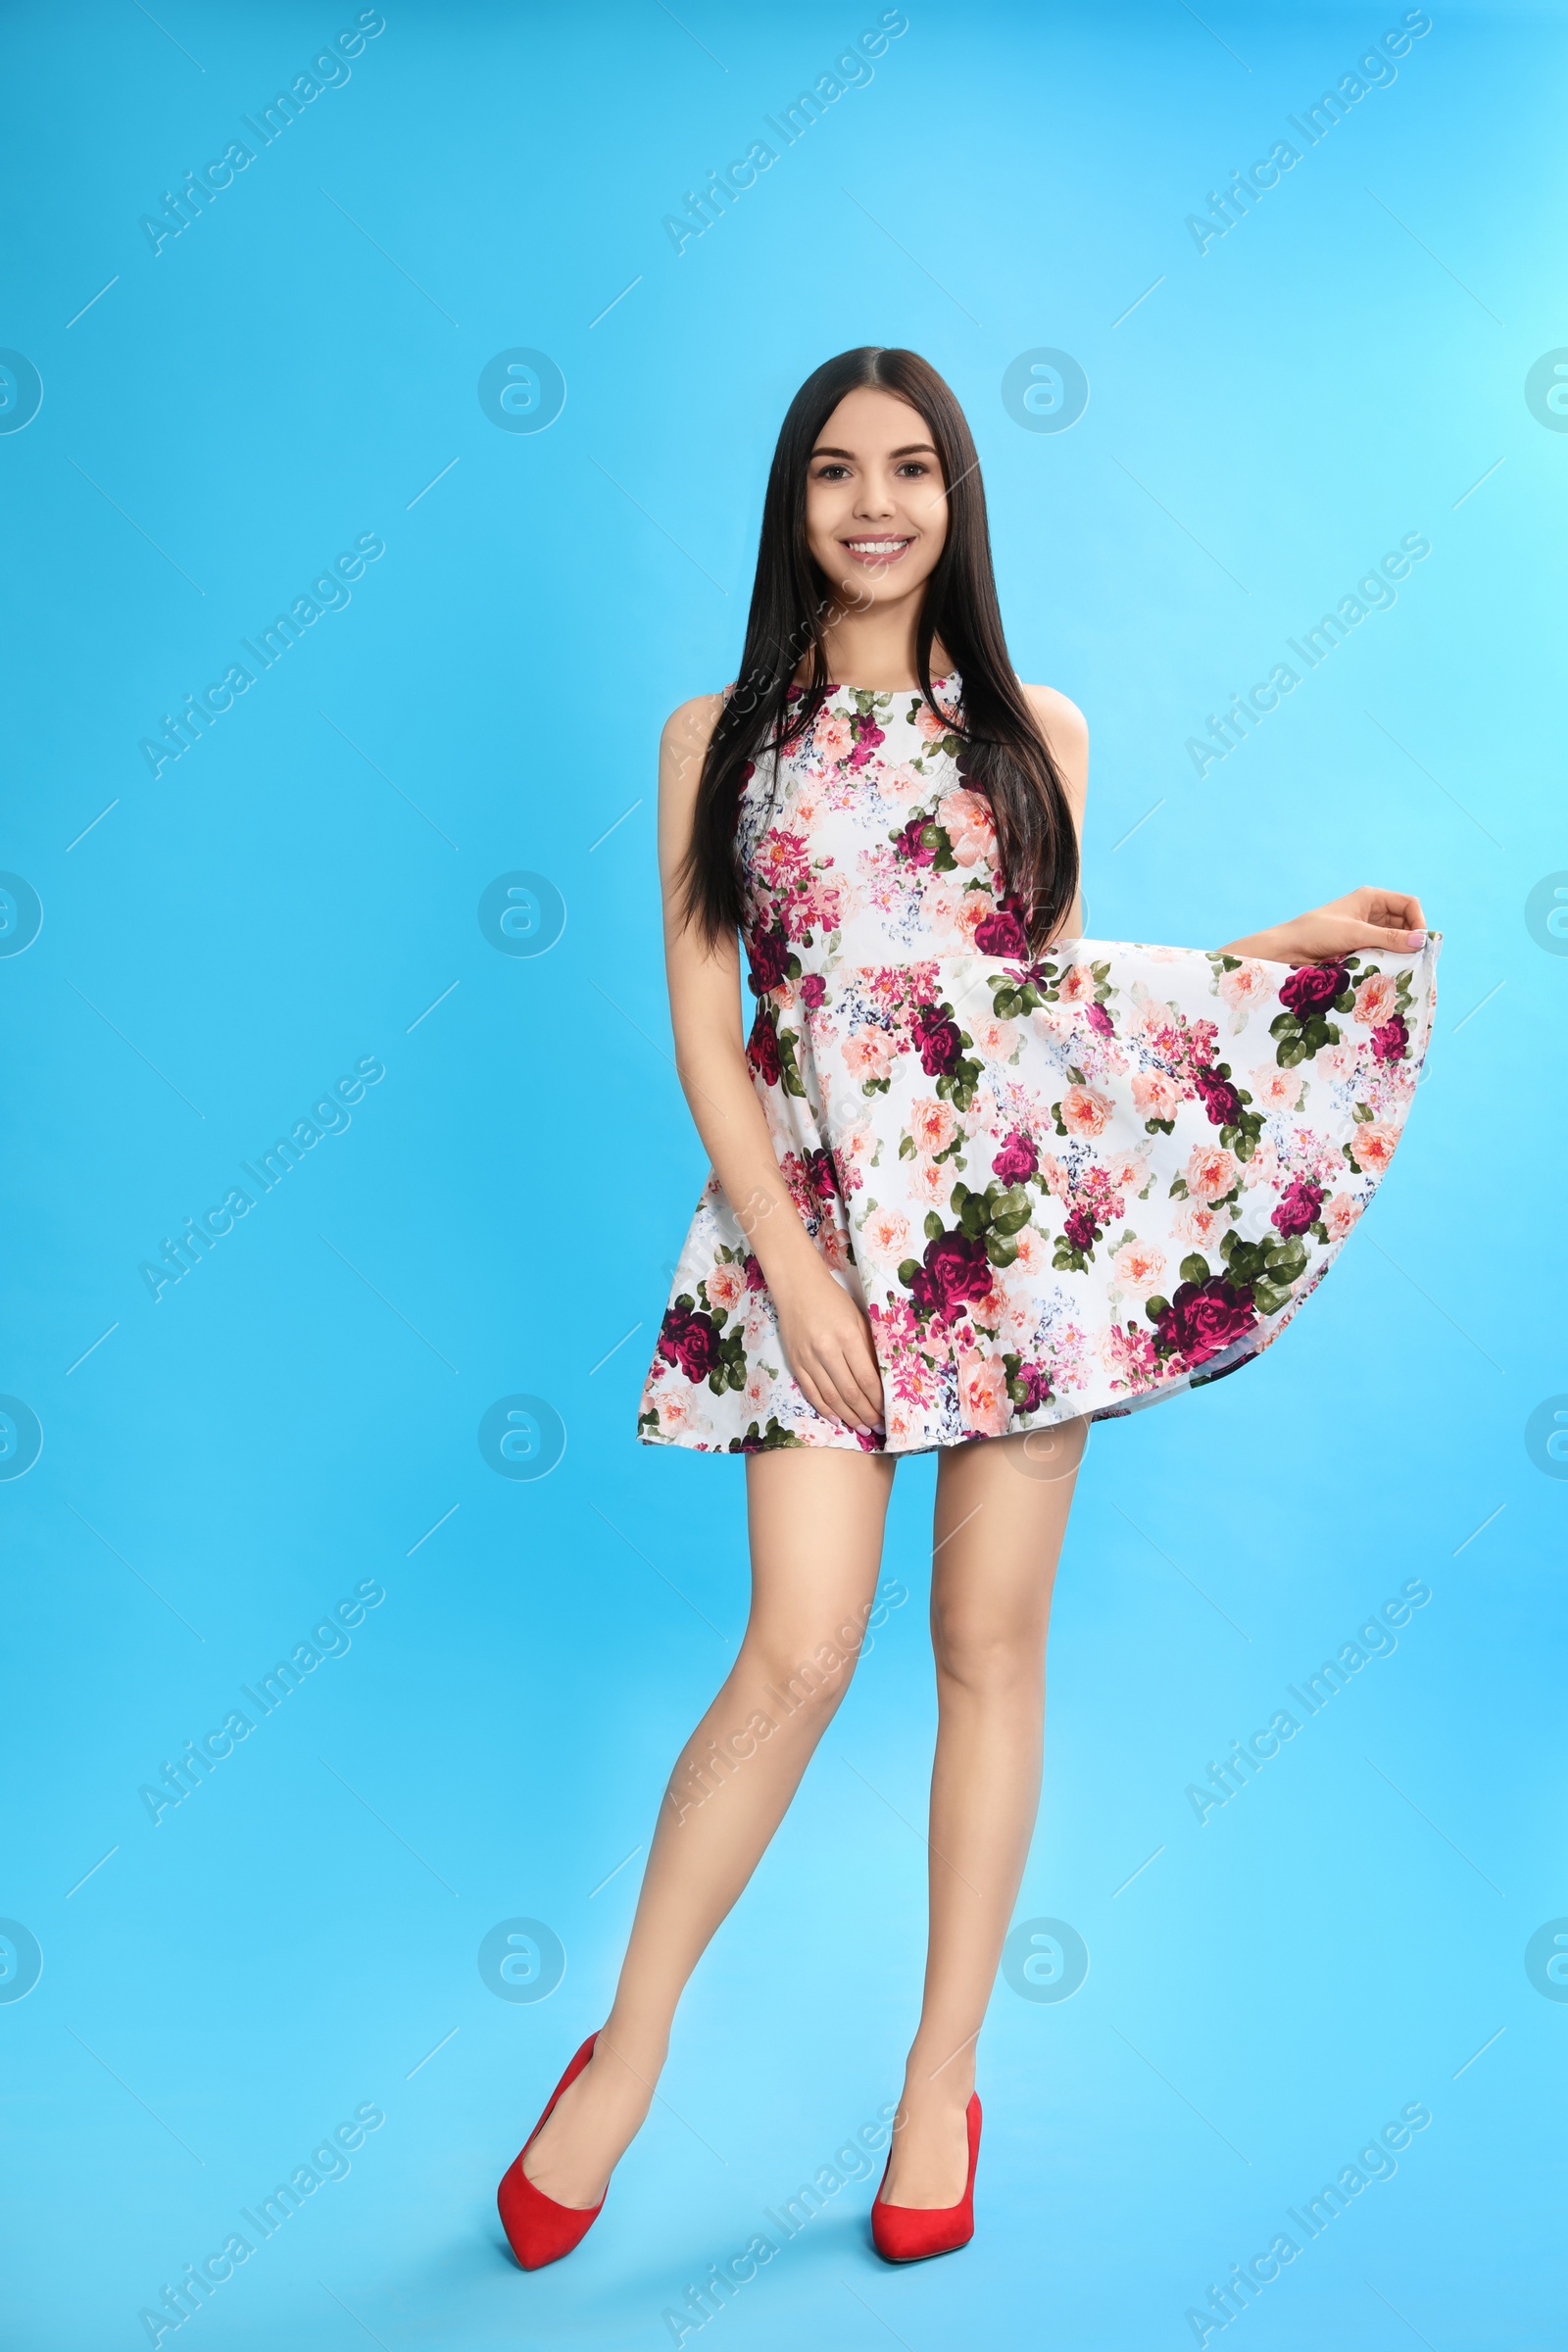 Photo of Young woman wearing floral print dress on light blue background